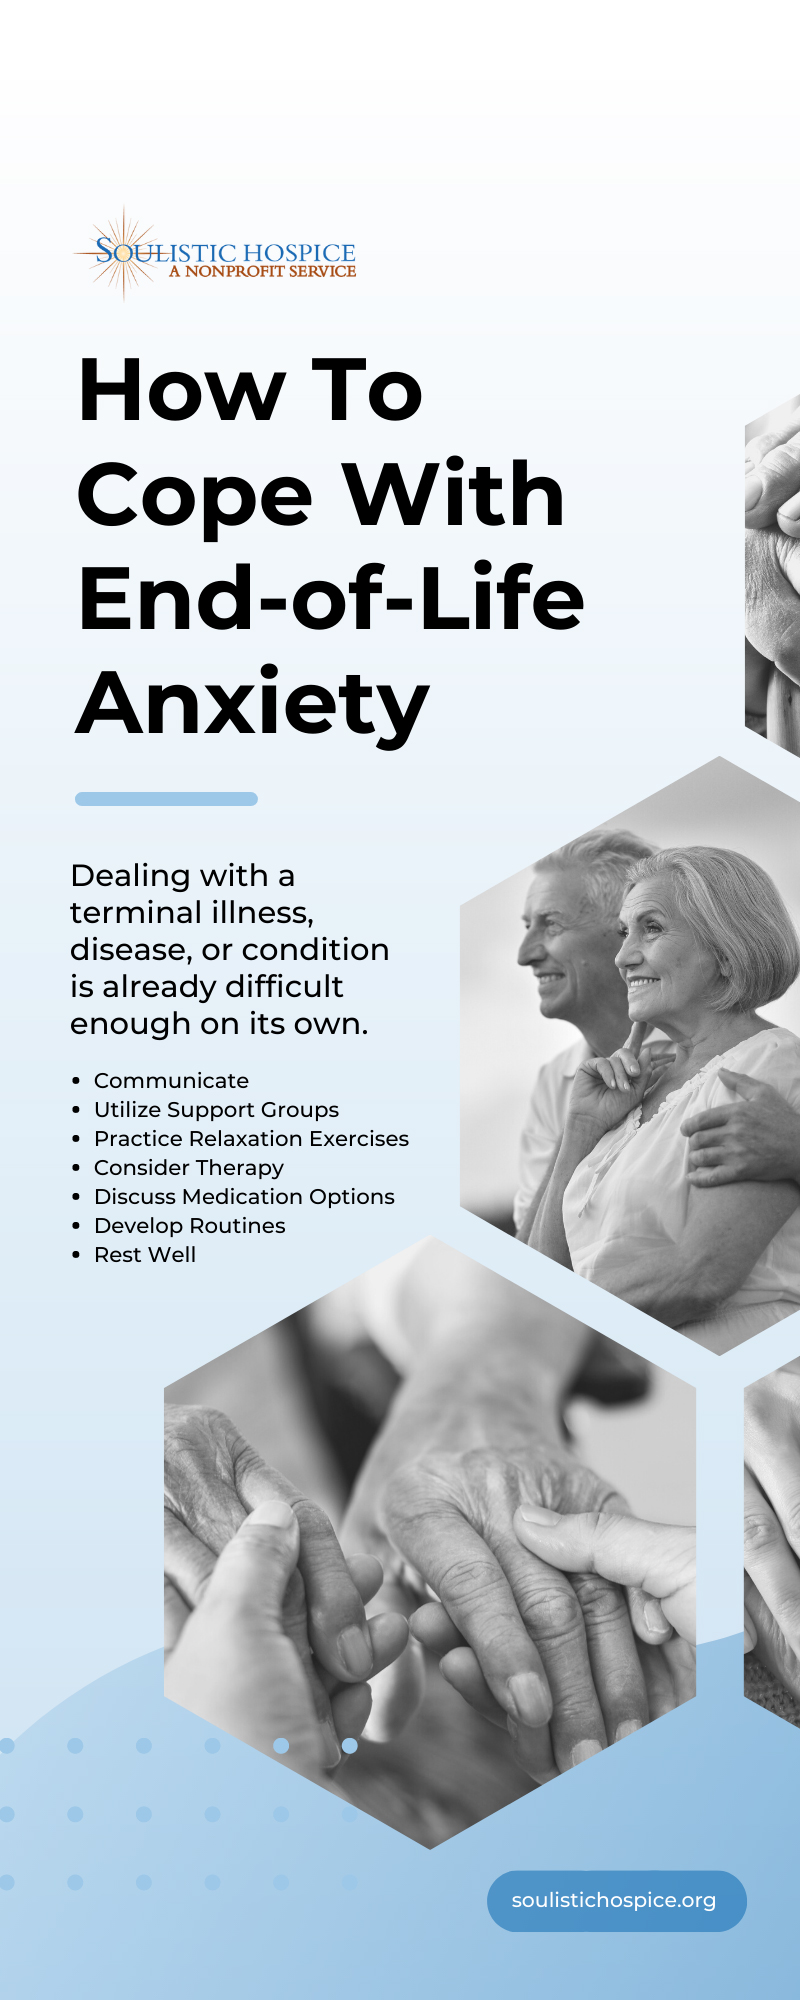 How To Cope With End-of-Life Anxiety